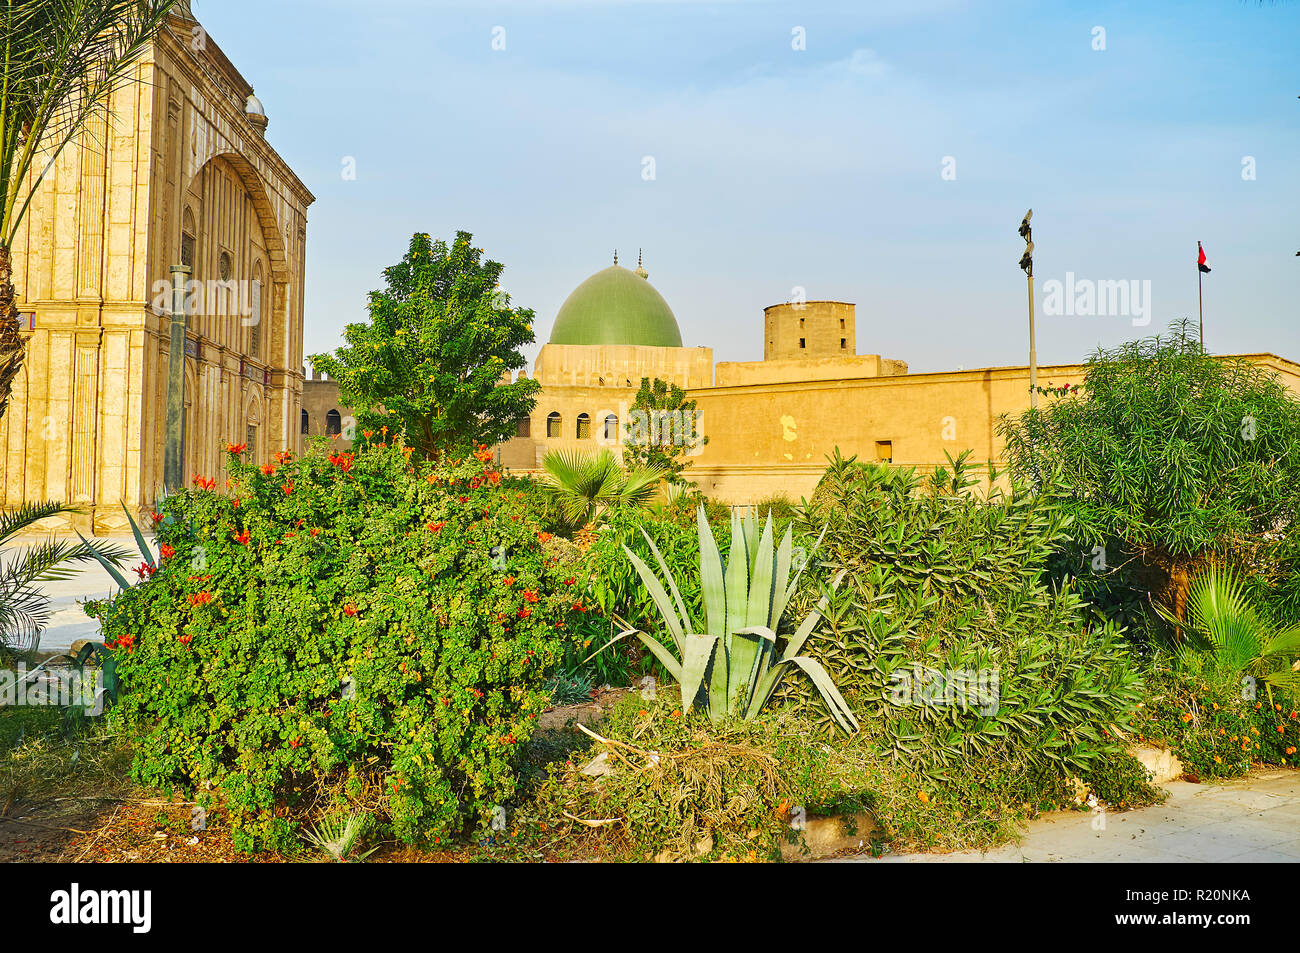 Enjoy the scenic garden of Saladin Citadel with a view on inner walls, tower and the green dome of Al-Nasir Muhammad Mosque, Cairo, Egypt. Stock Photo